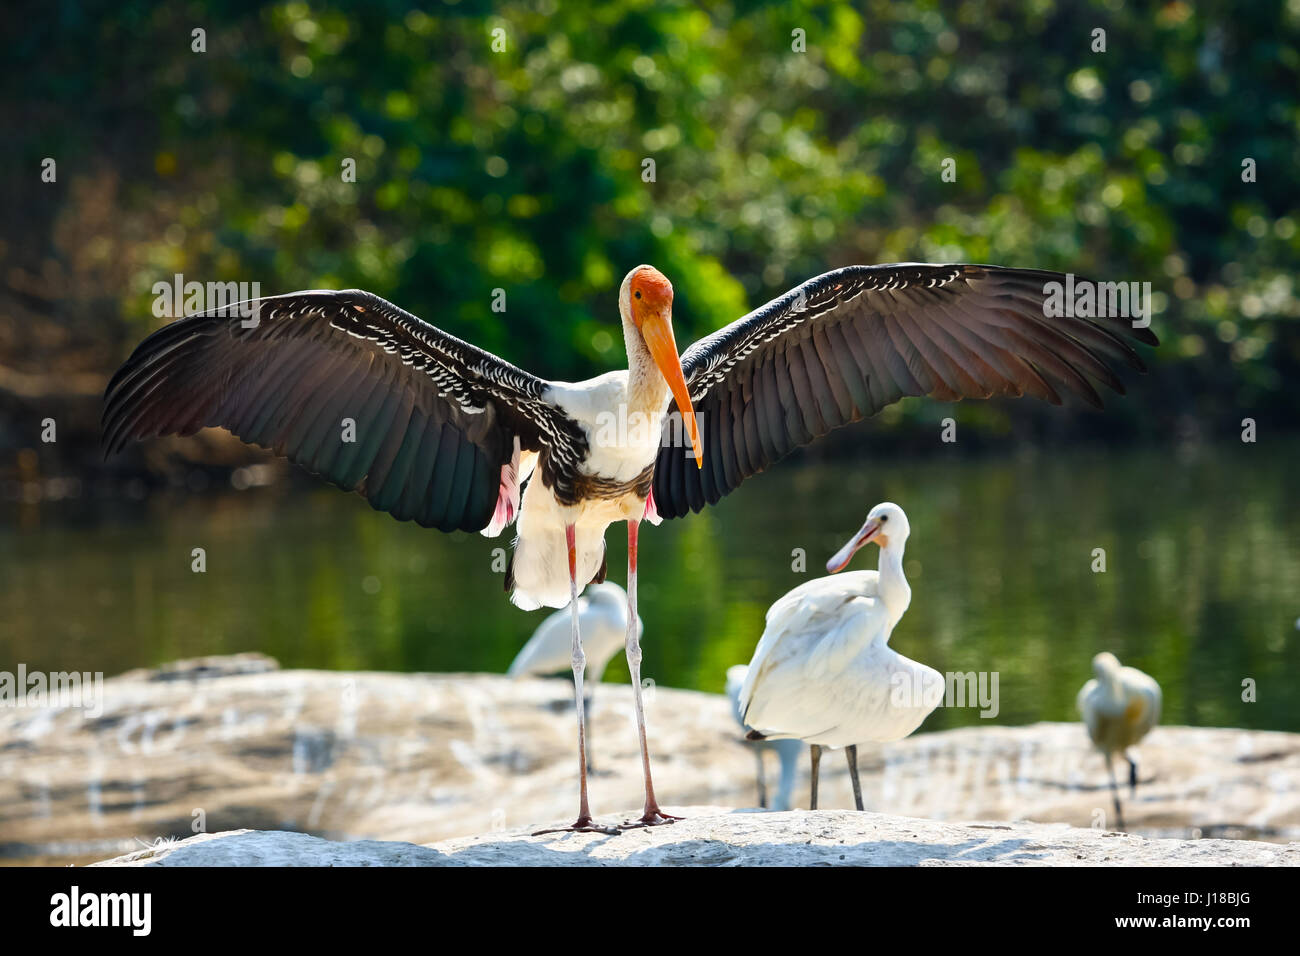 A painted stork drying its wings in the sun. Stock Photo